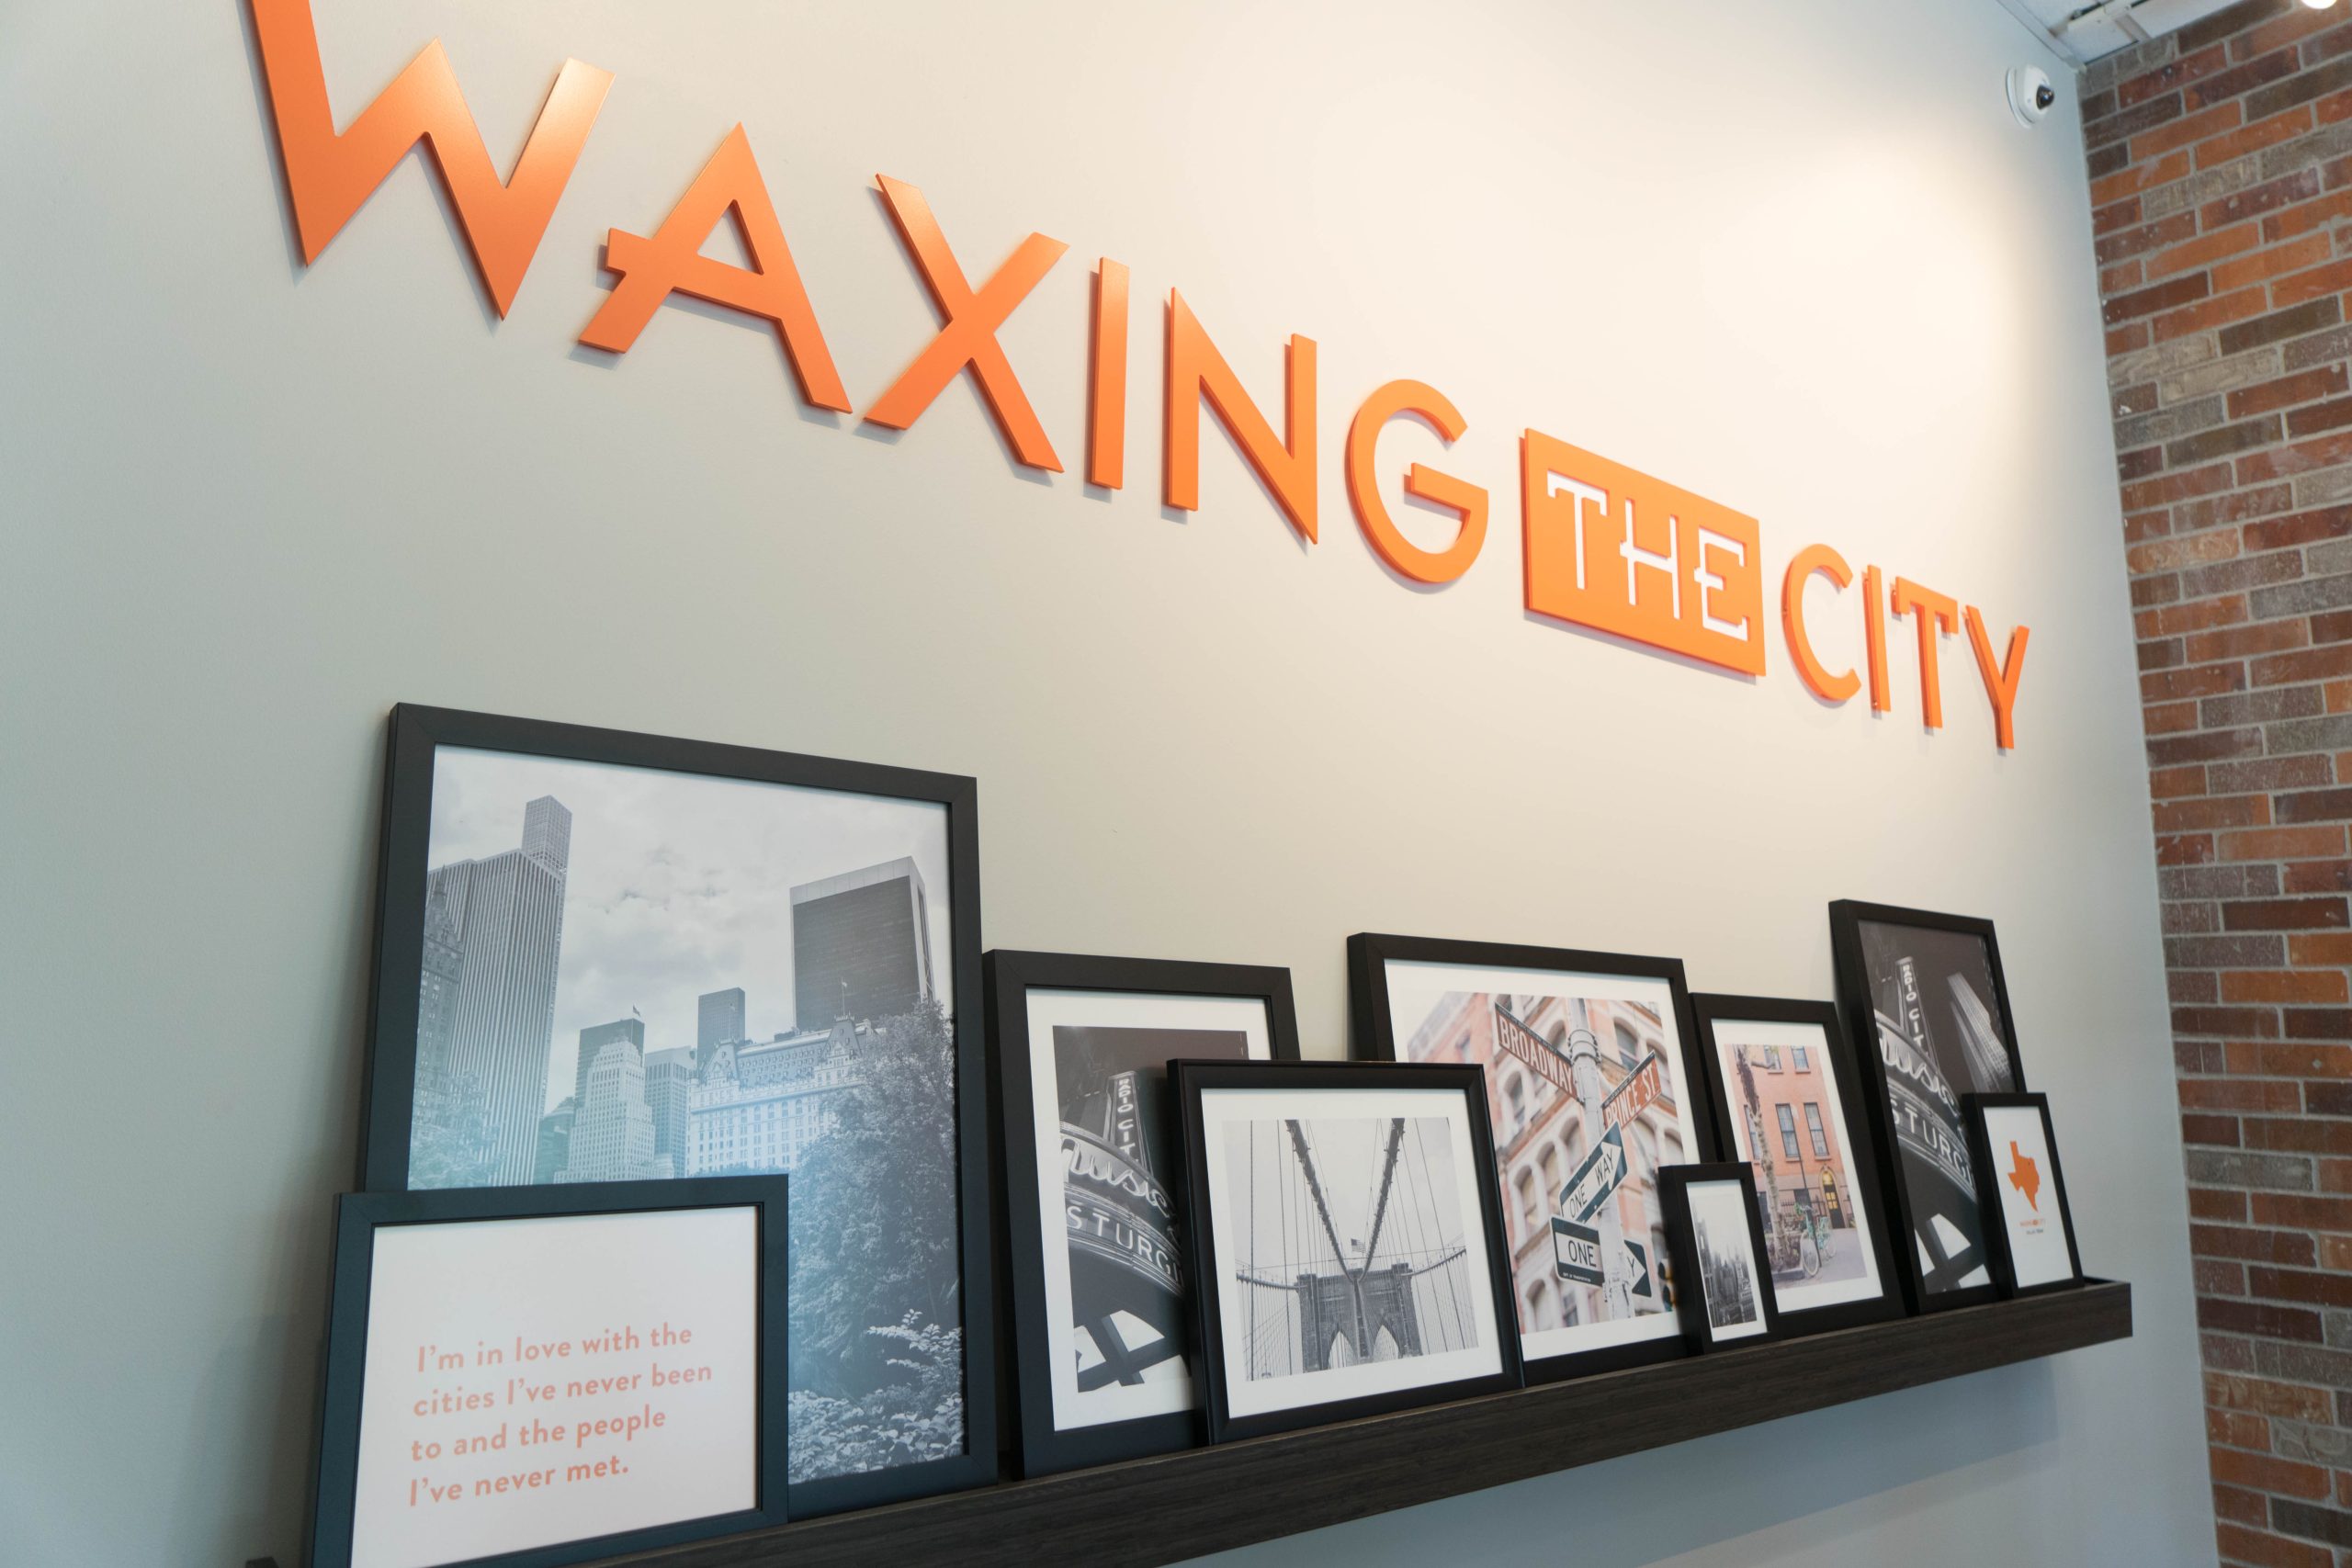 Waxing The City